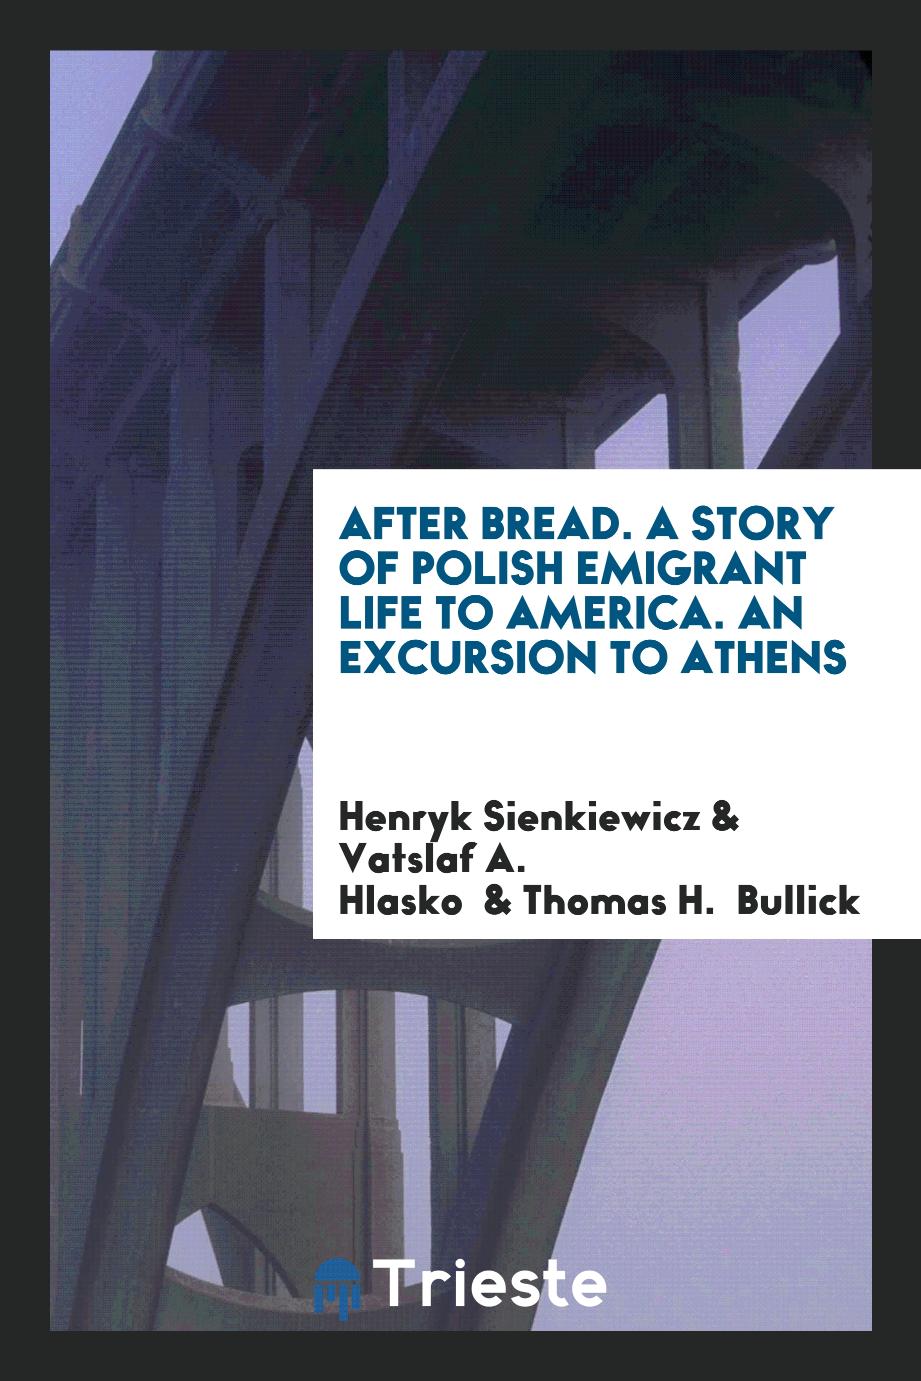 After bread. A Story of Polish Emigrant Life to America. An Excursion to Athens